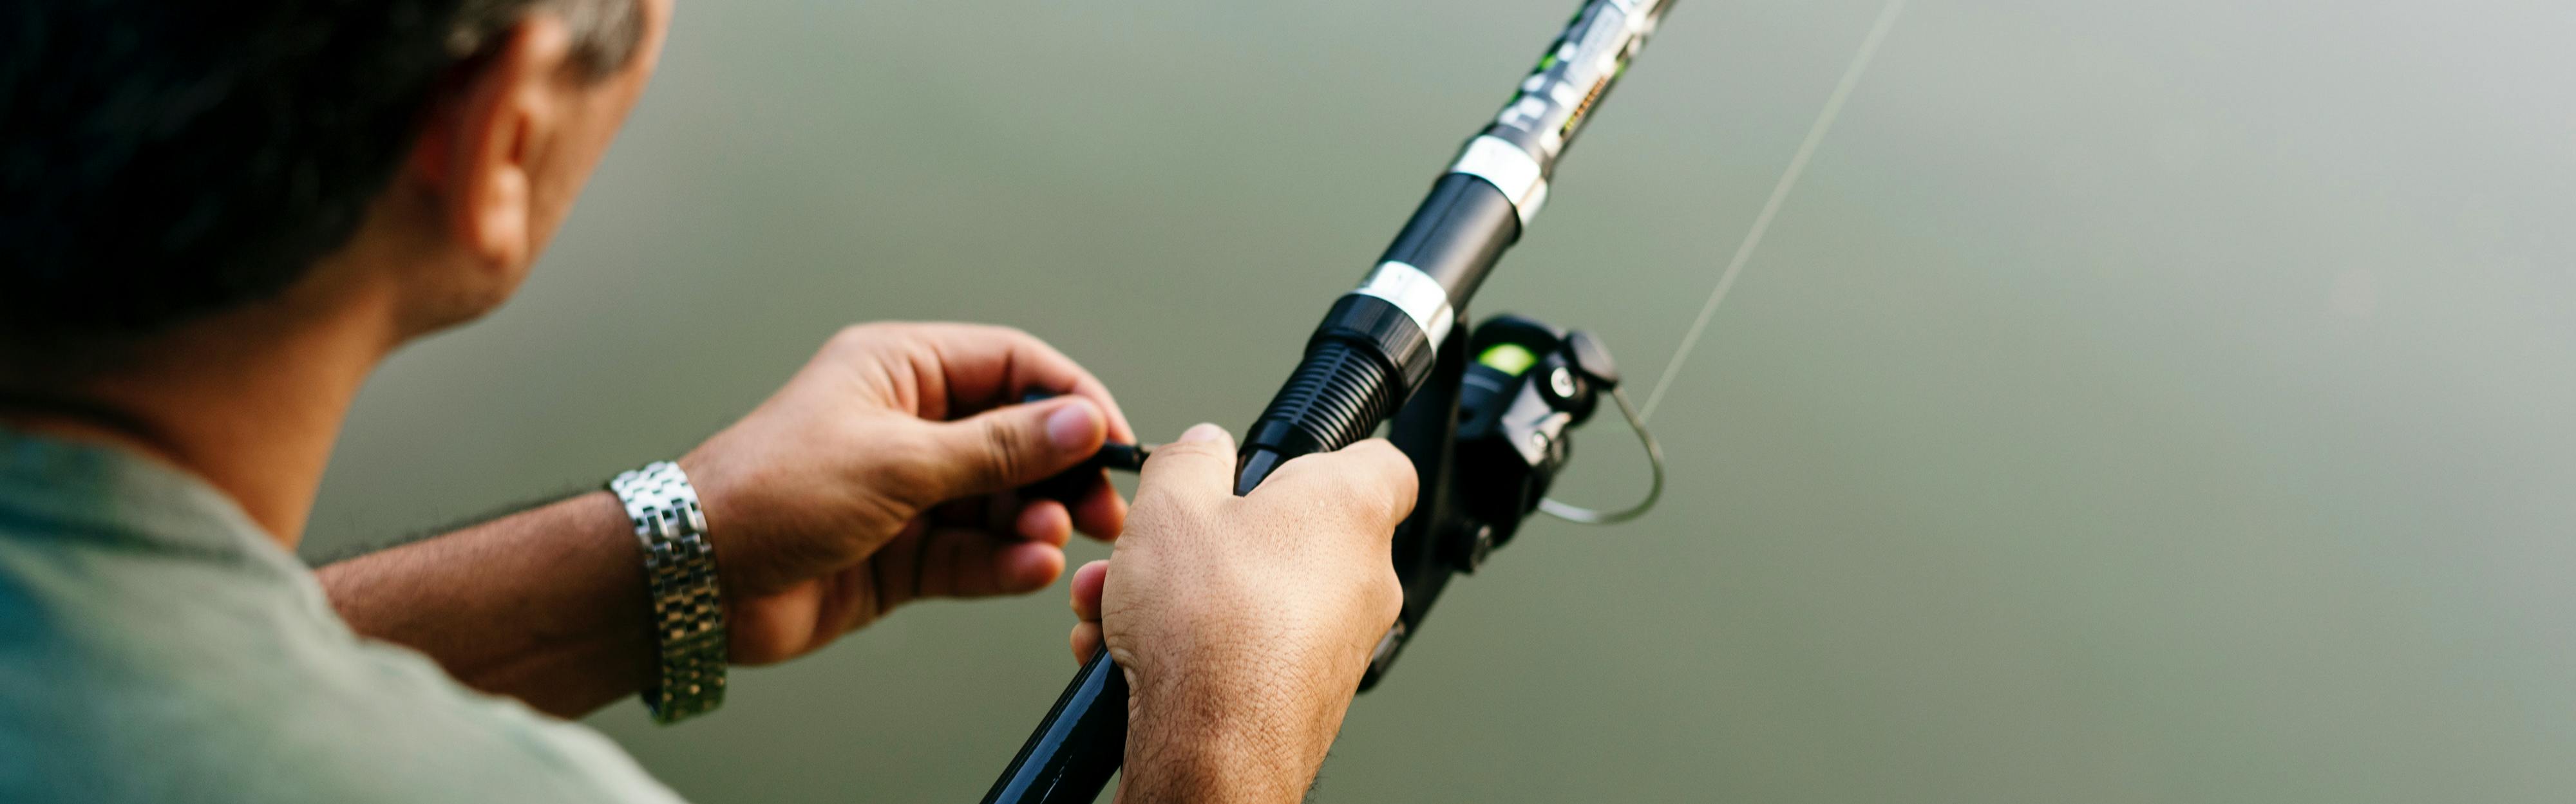 How to Repair A Broken Fly Fishing Rod